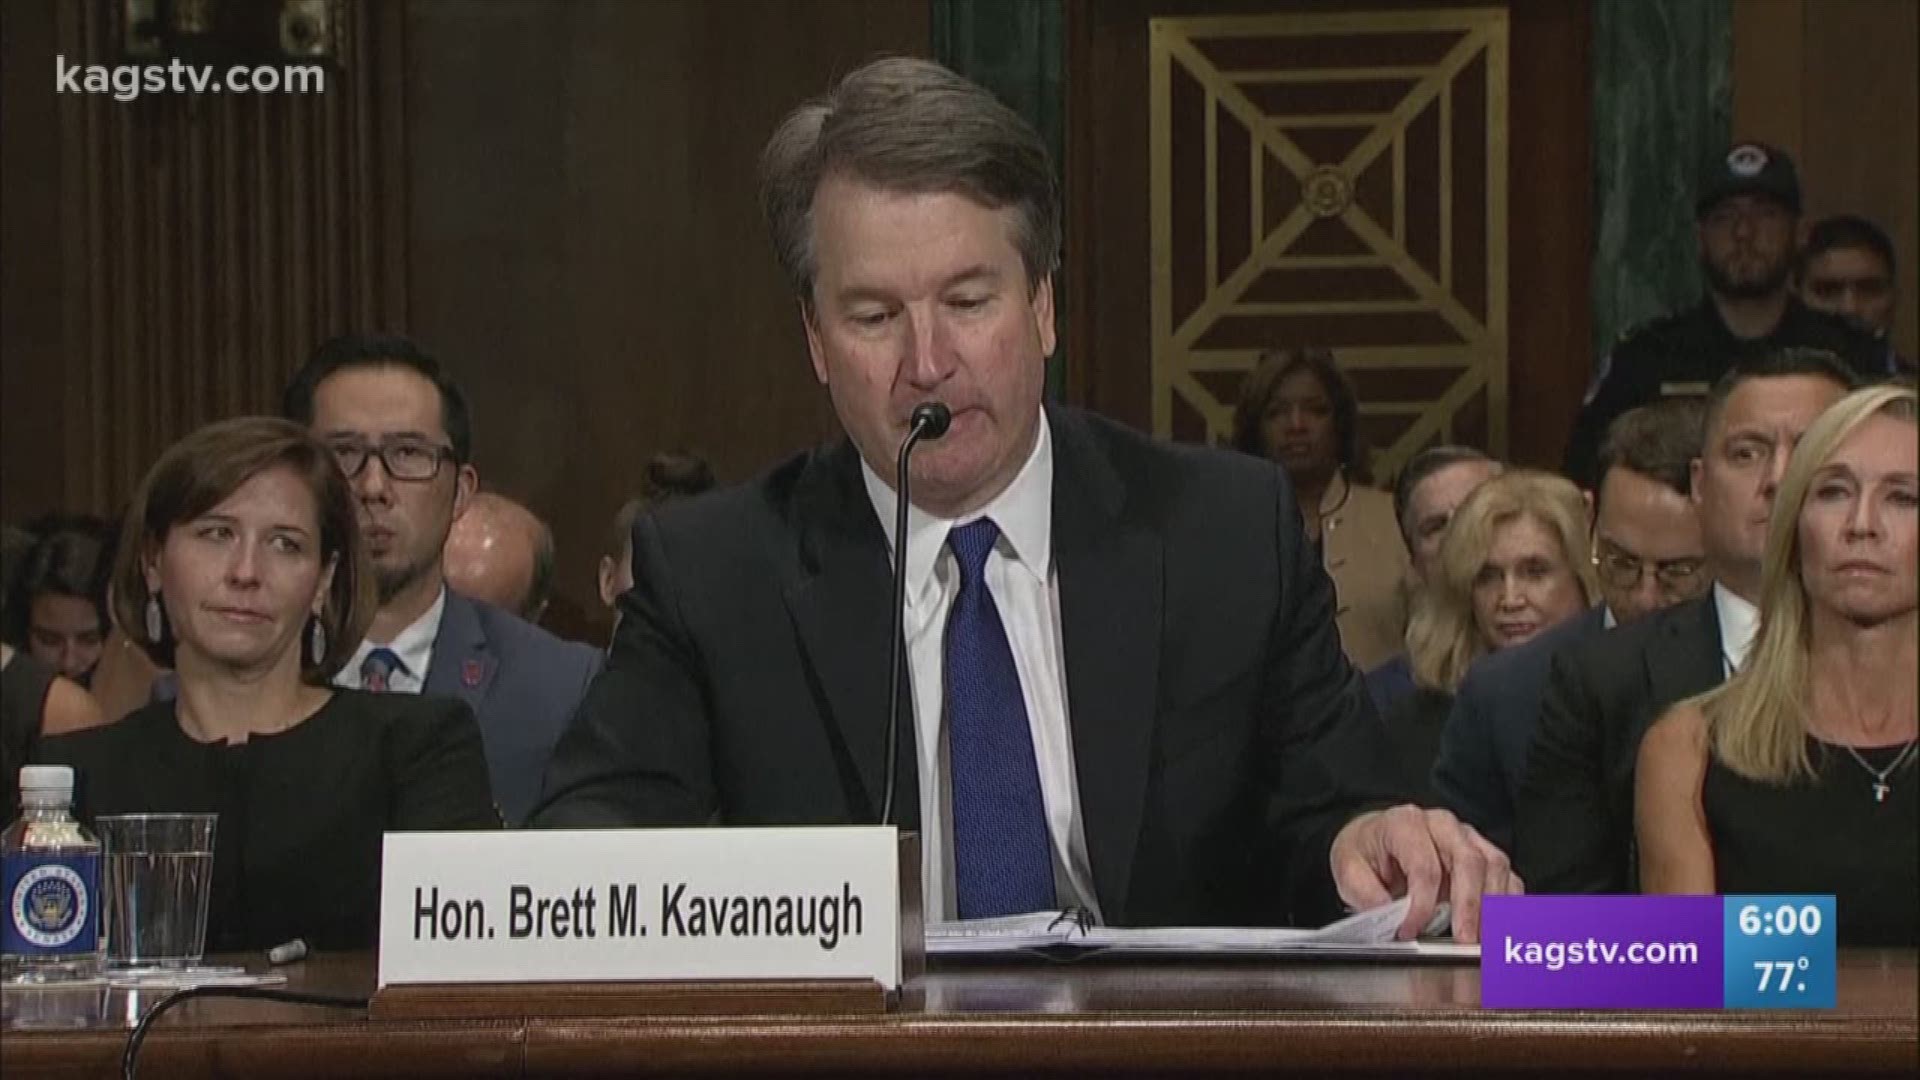 Eyes from across Texas and the nation are on Washington tonight after marathon Senate hearings over sexual assault allegations against Supreme Court Nominee Judge Brett Kavanaugh.